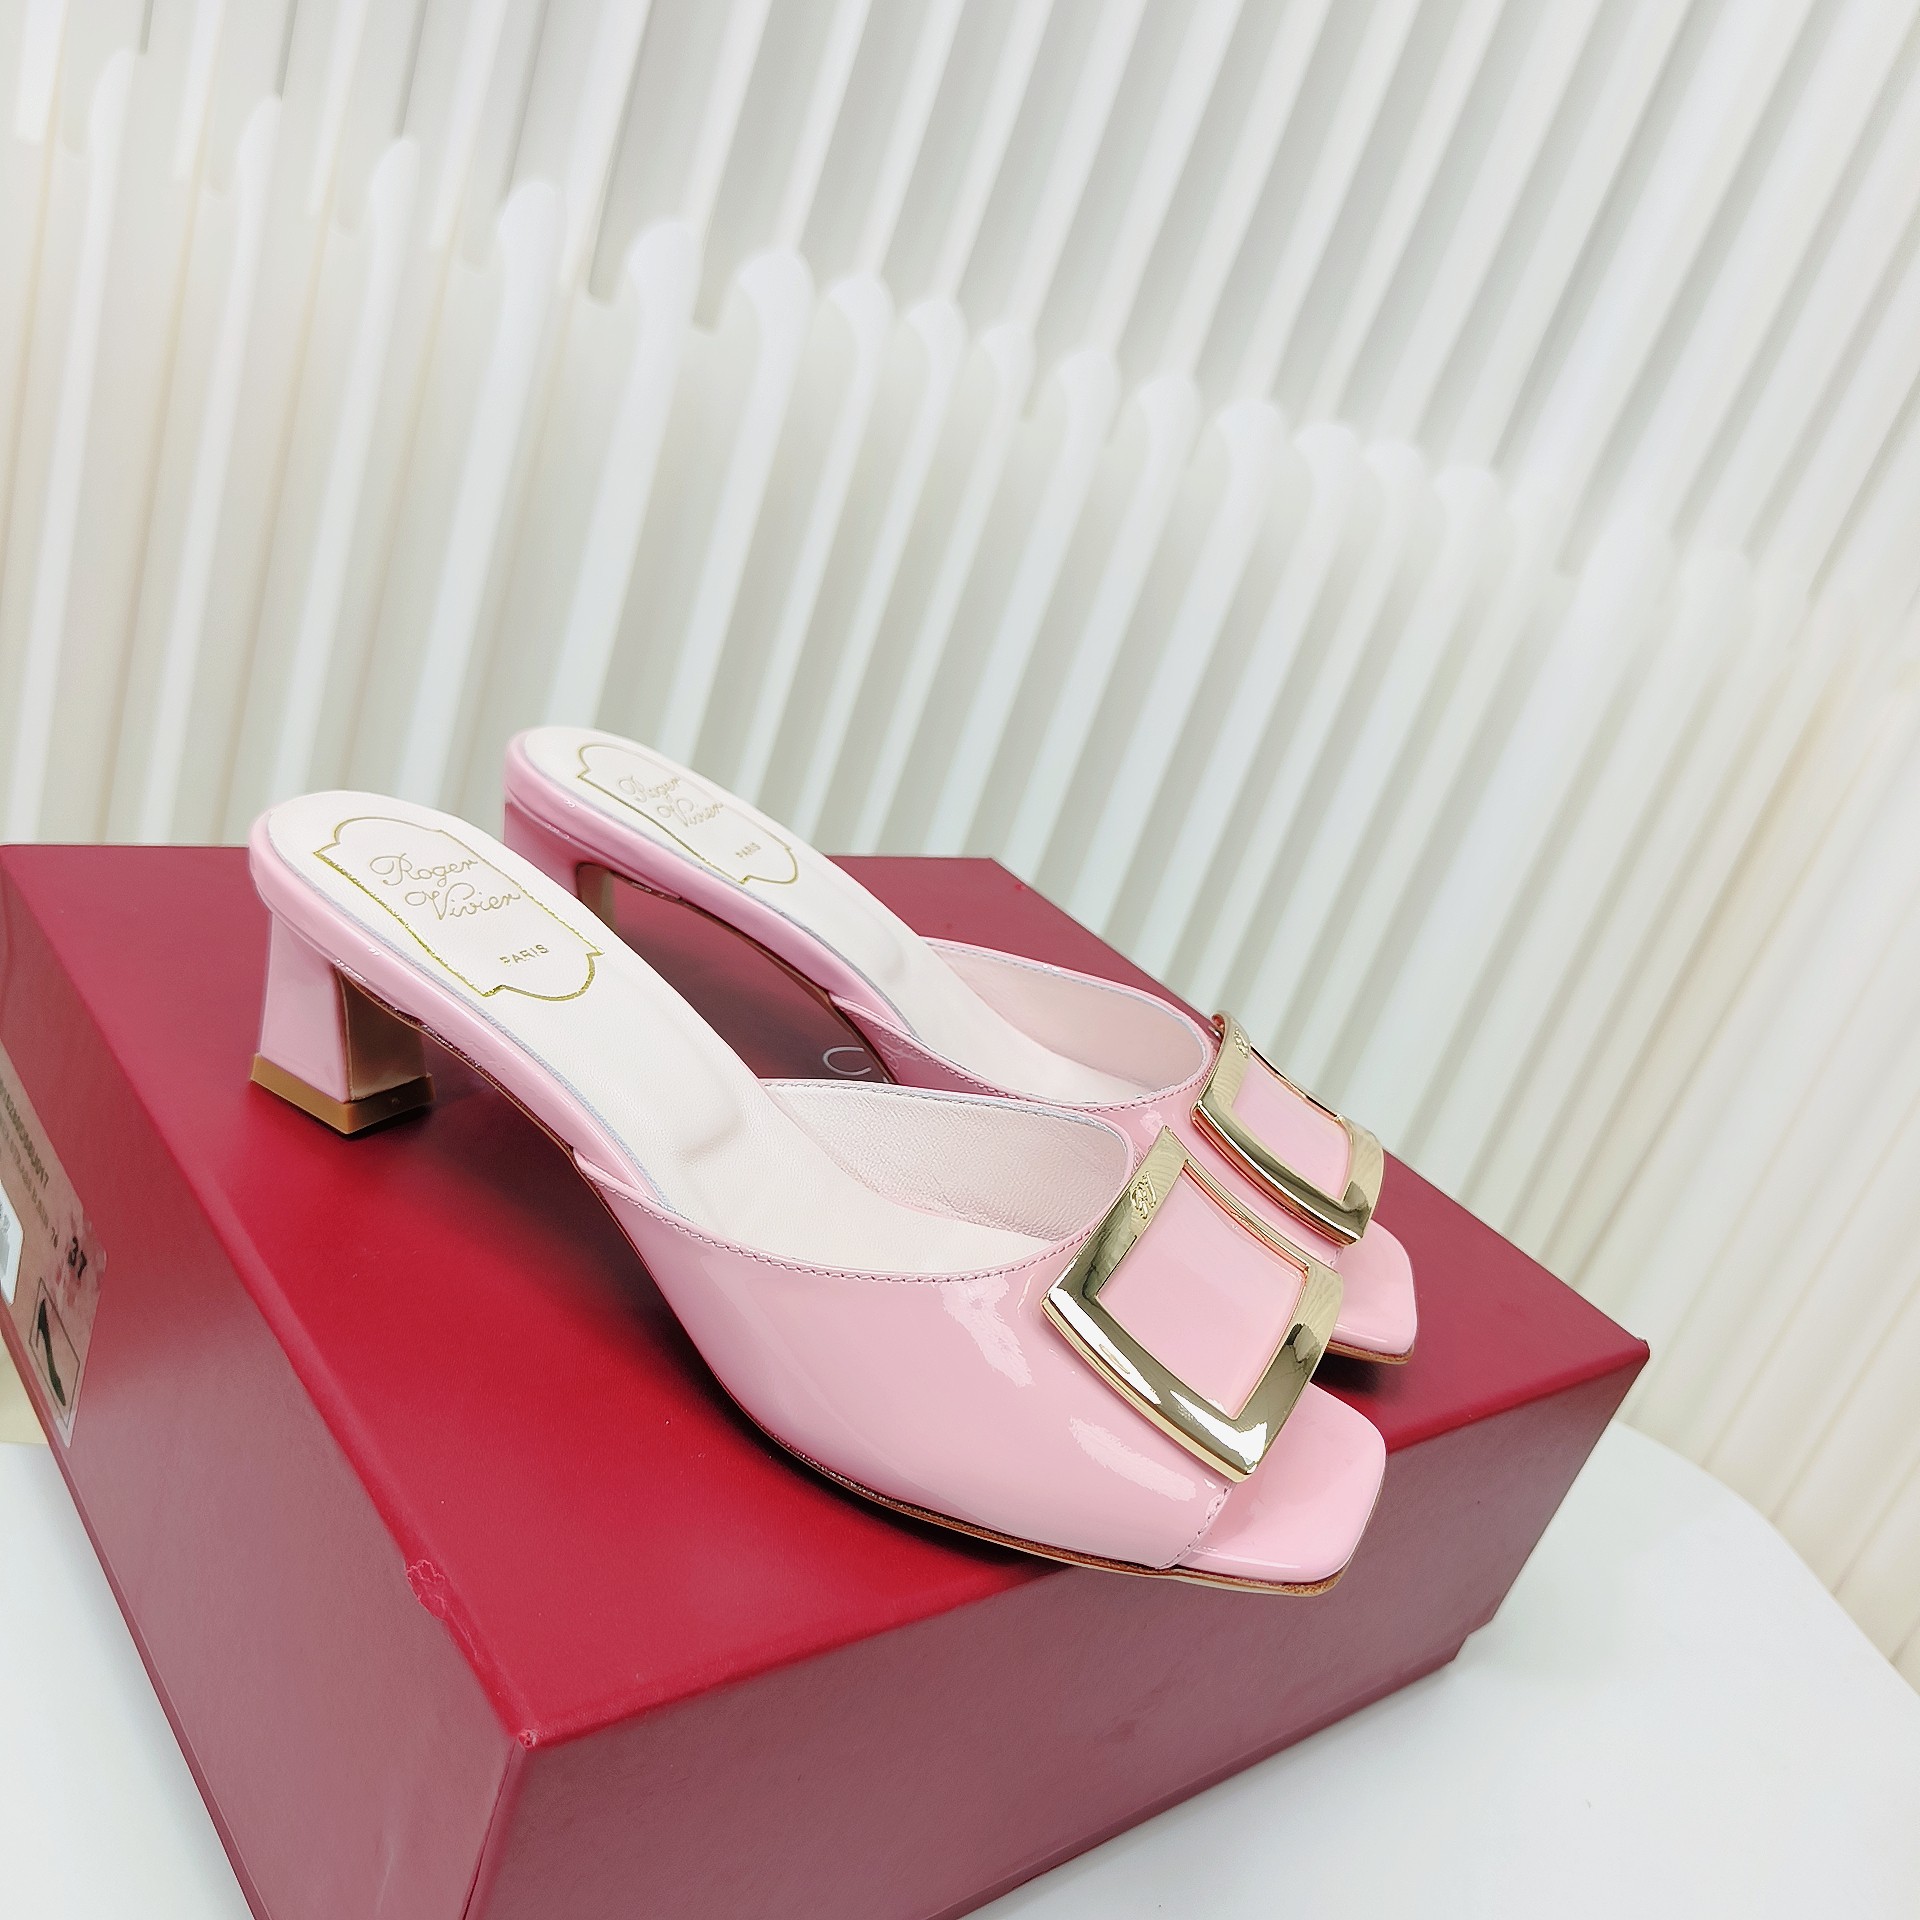 Roger Vivier Shoes Slippers Patent Leather Summer Collection